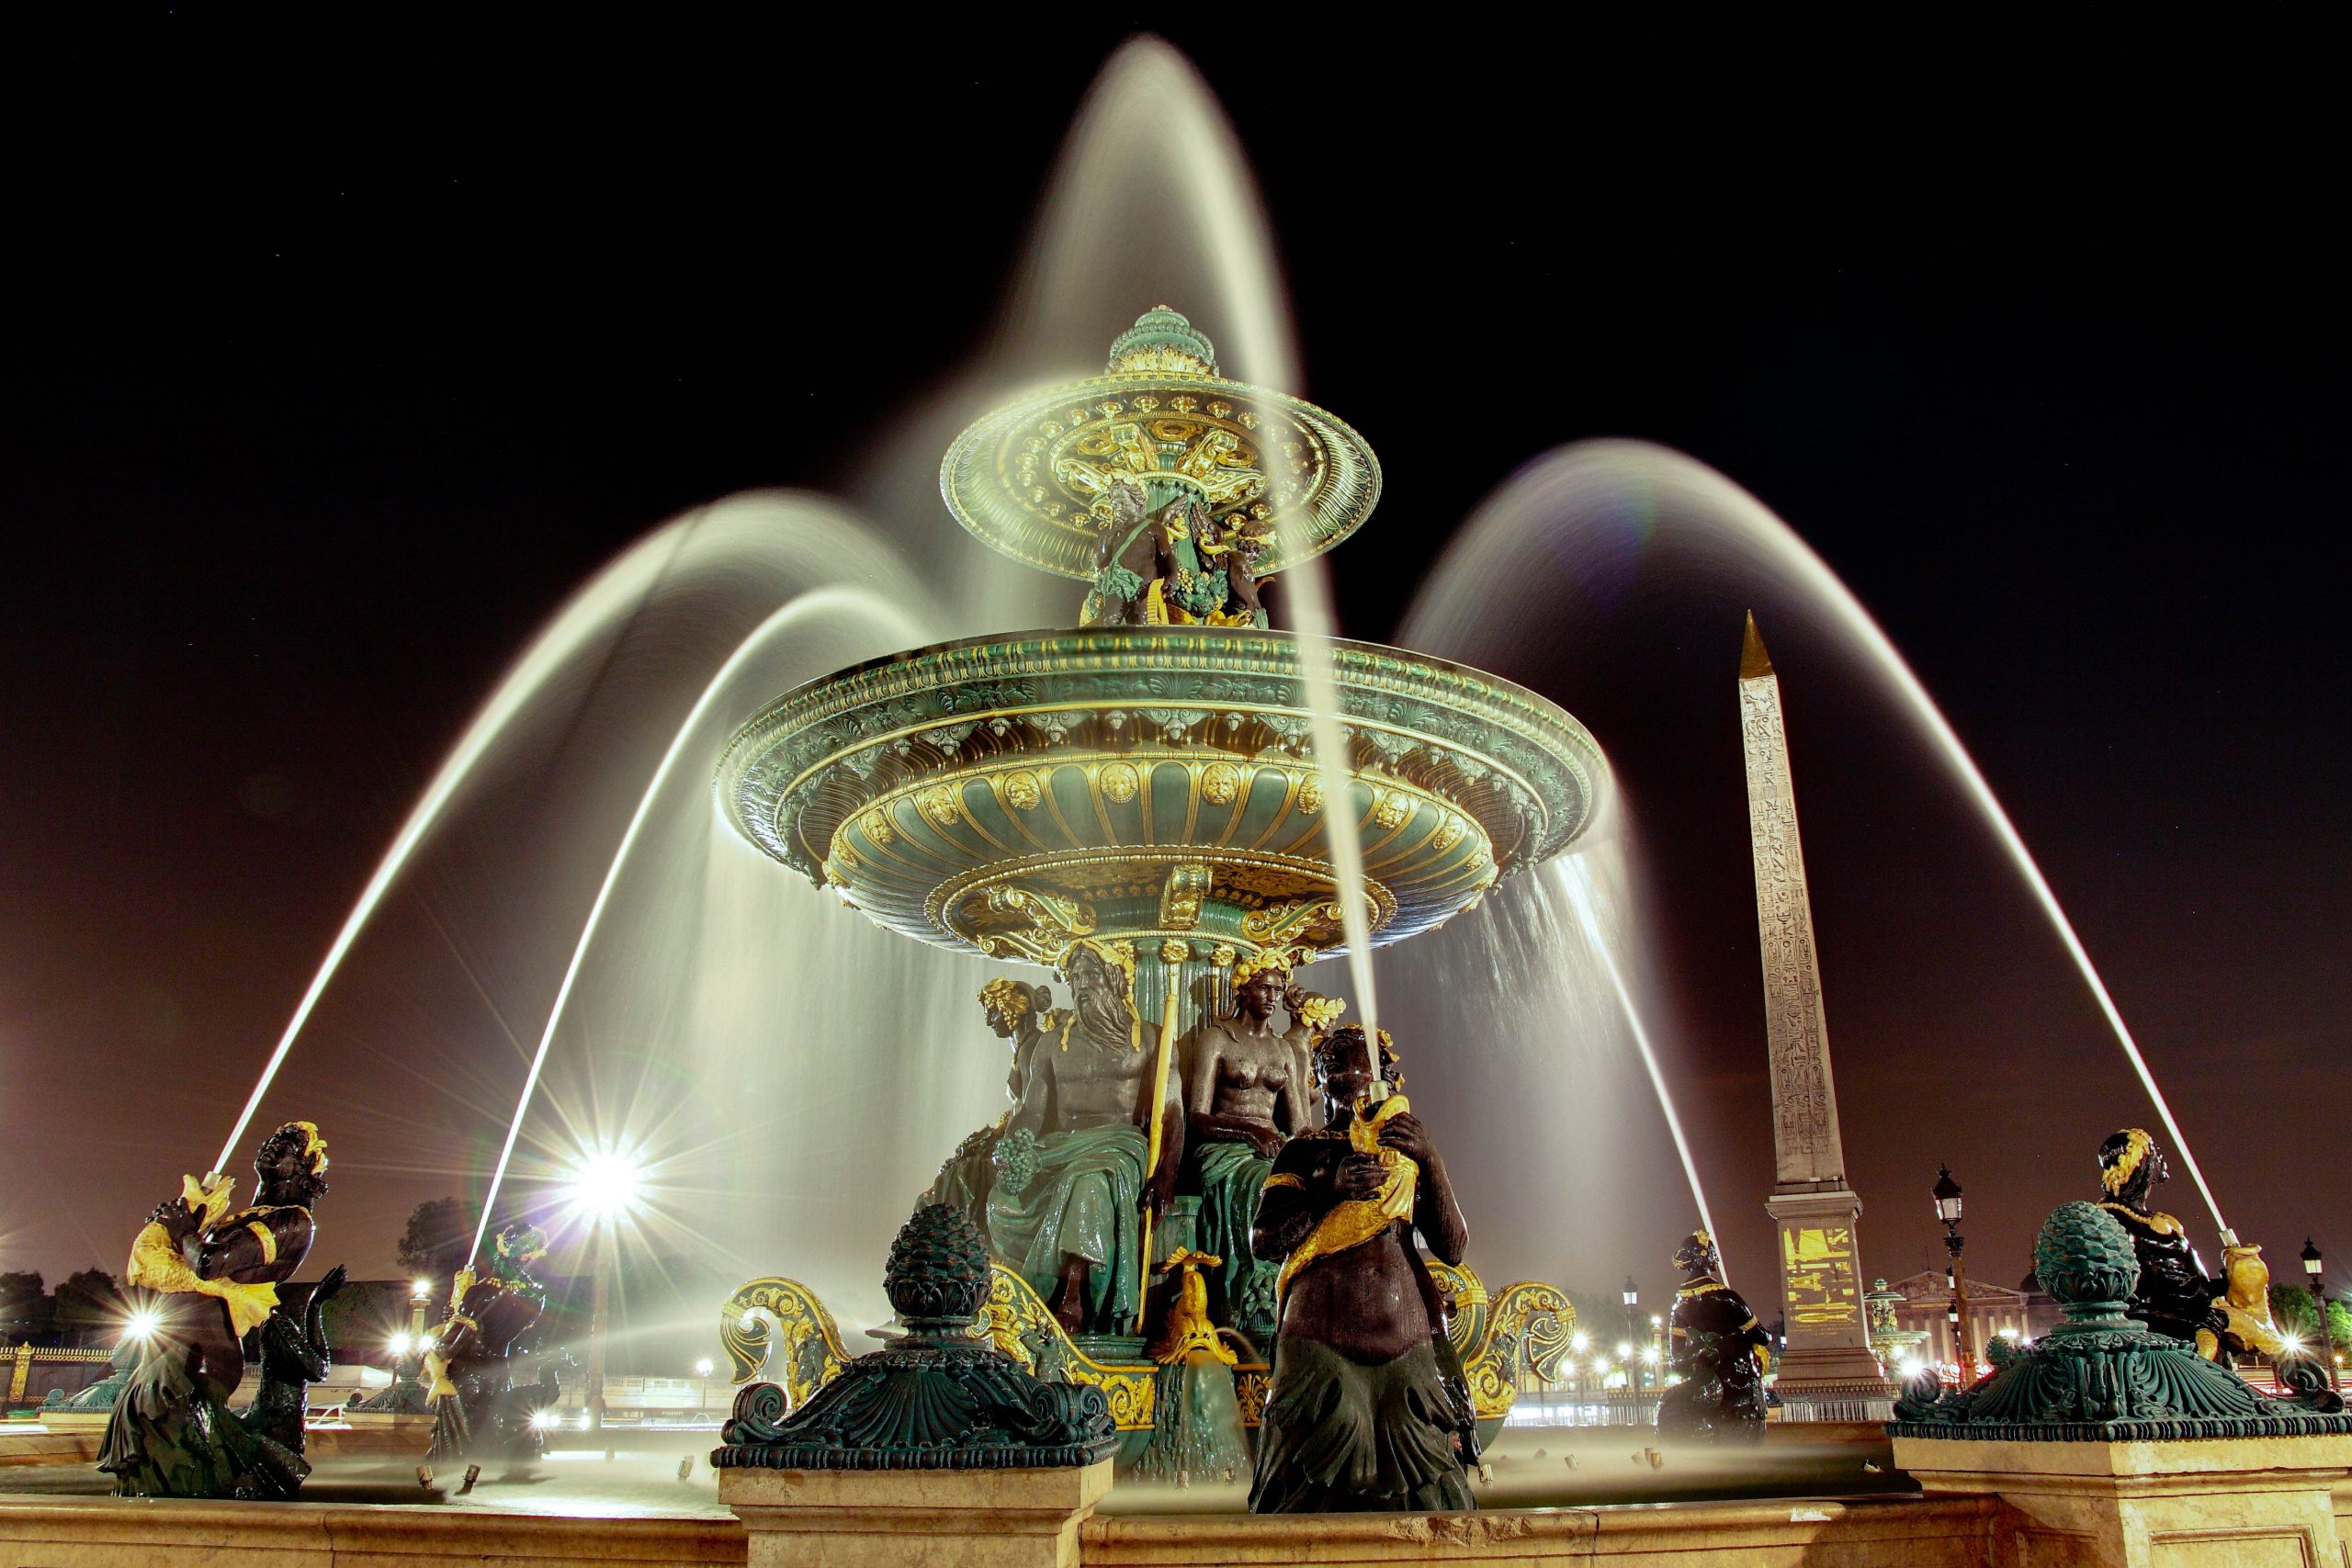 Fontaine des fleuves - Things To Do at Place de la Concorde Paris Olympics 2024 | Top Attractions, Night Life, Restaurants